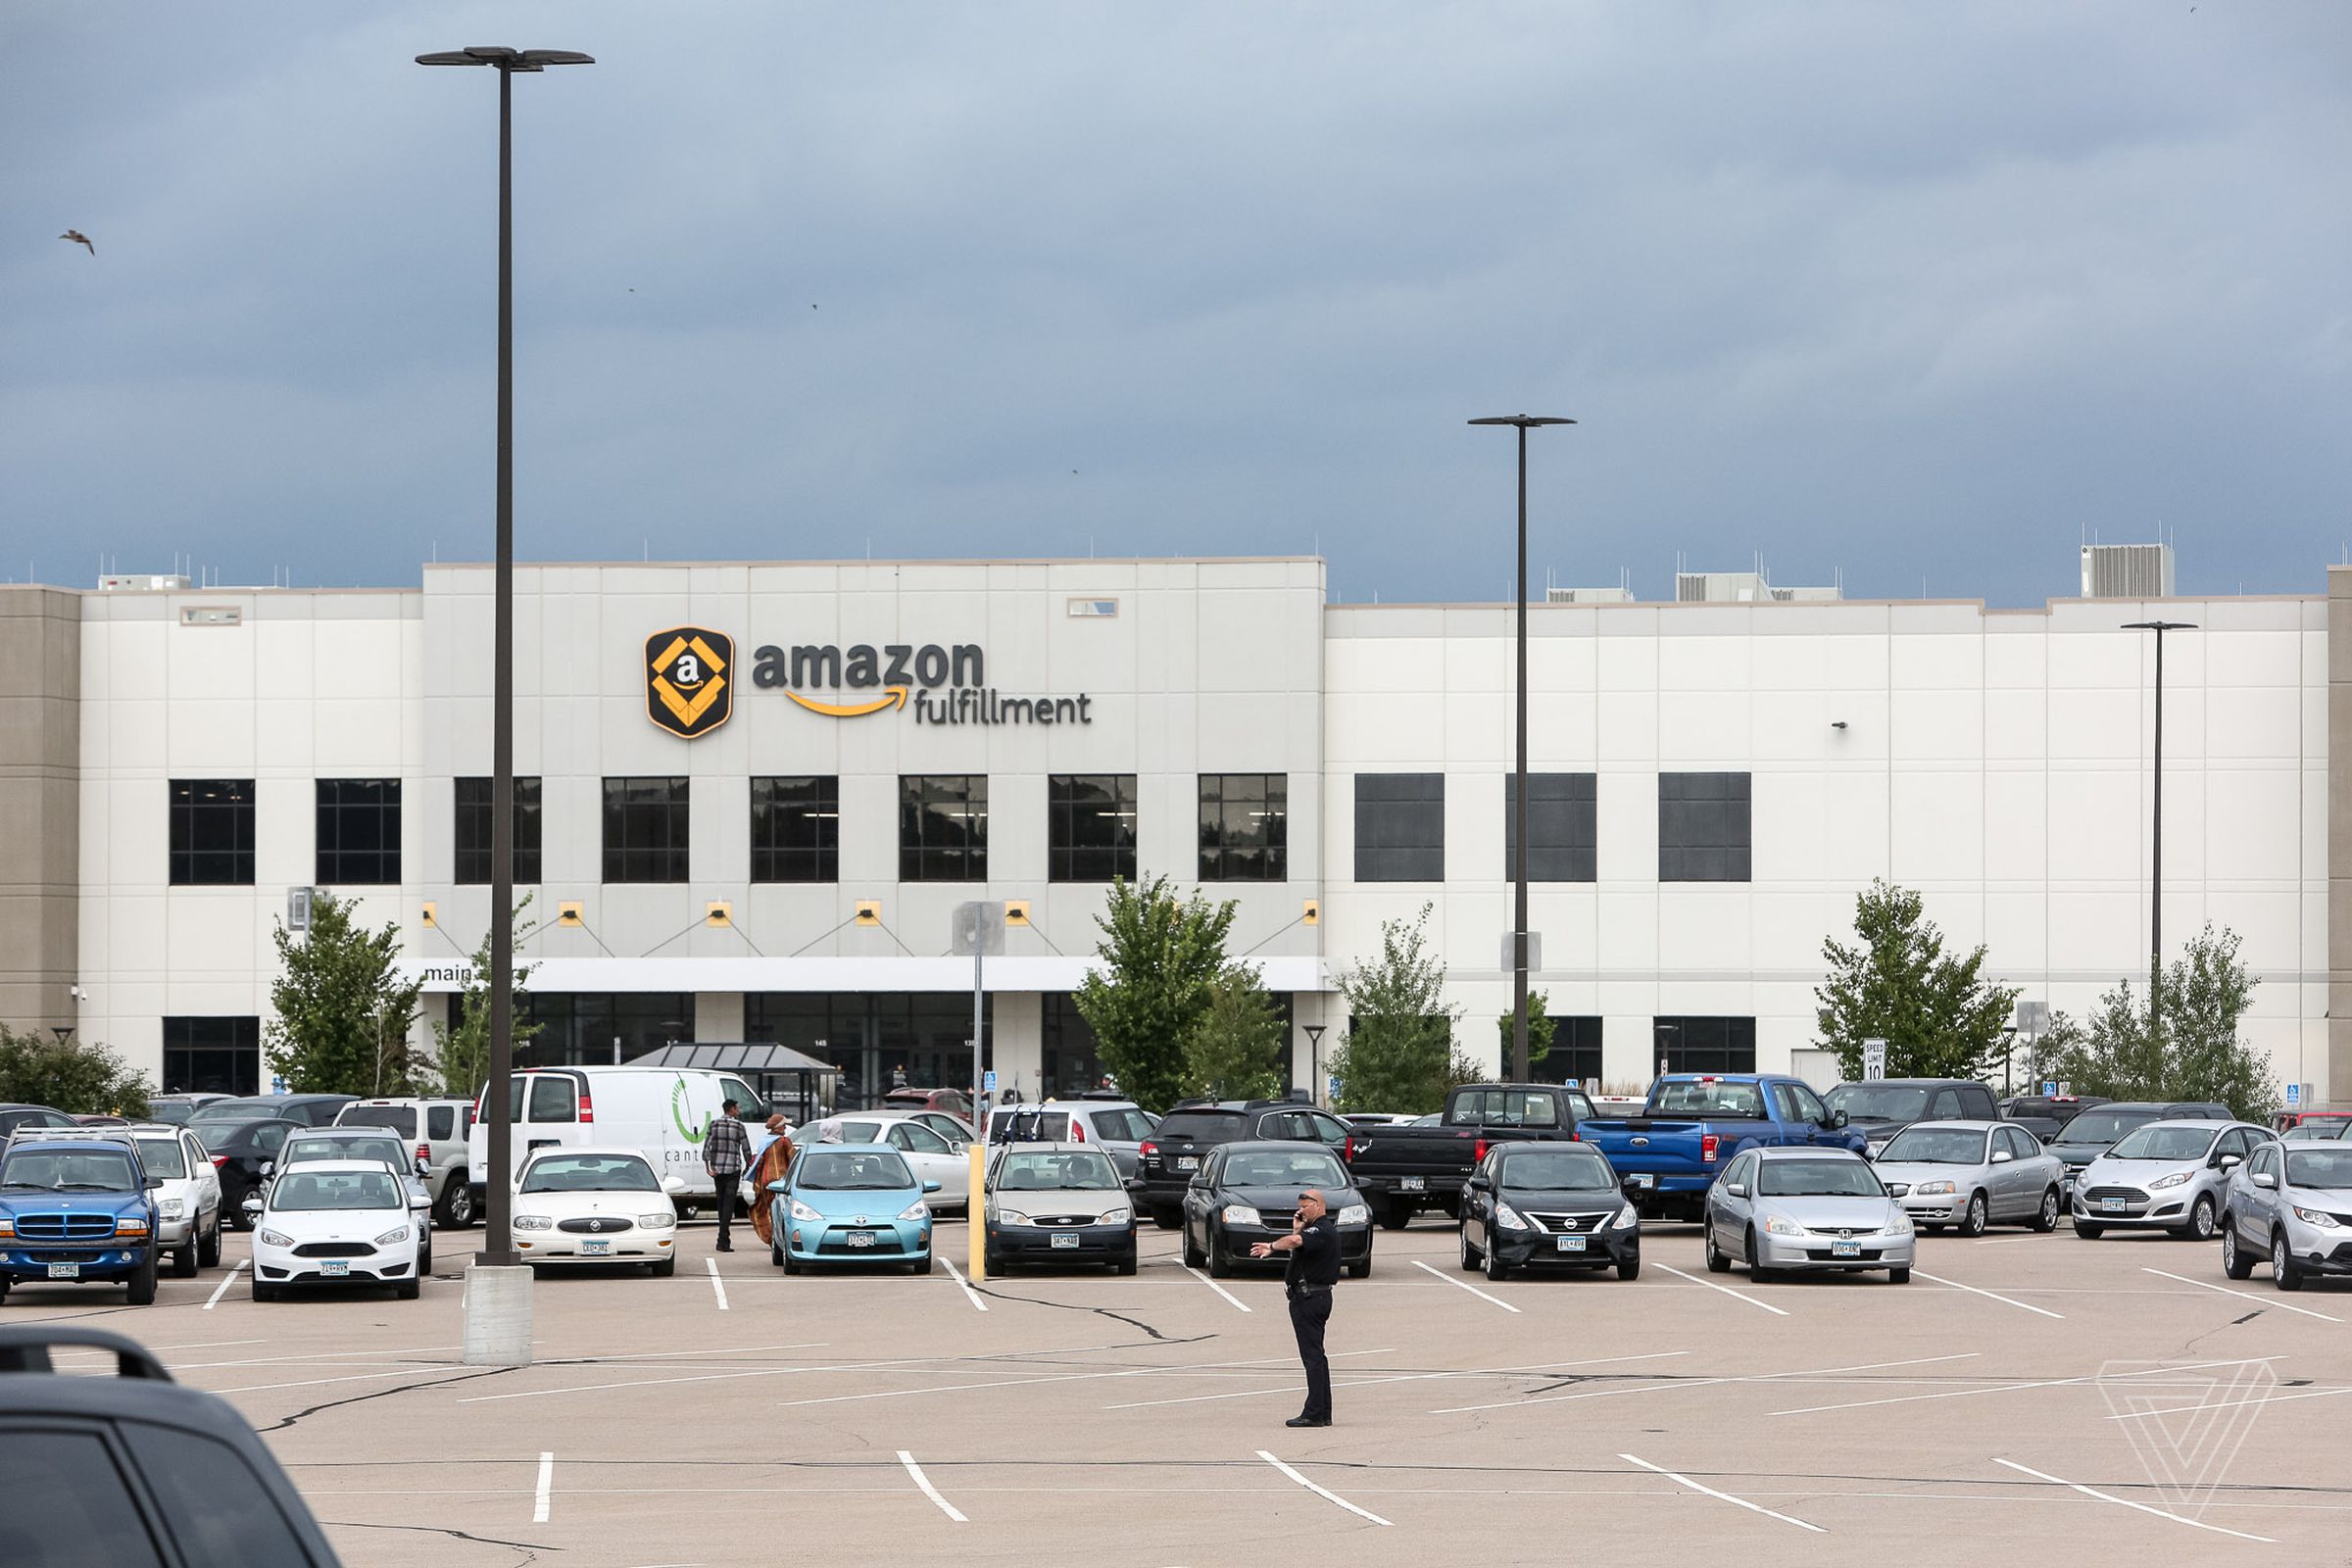 A fulfillment center in Shakopee, Minnesota, where workers went on strike earlier this year.